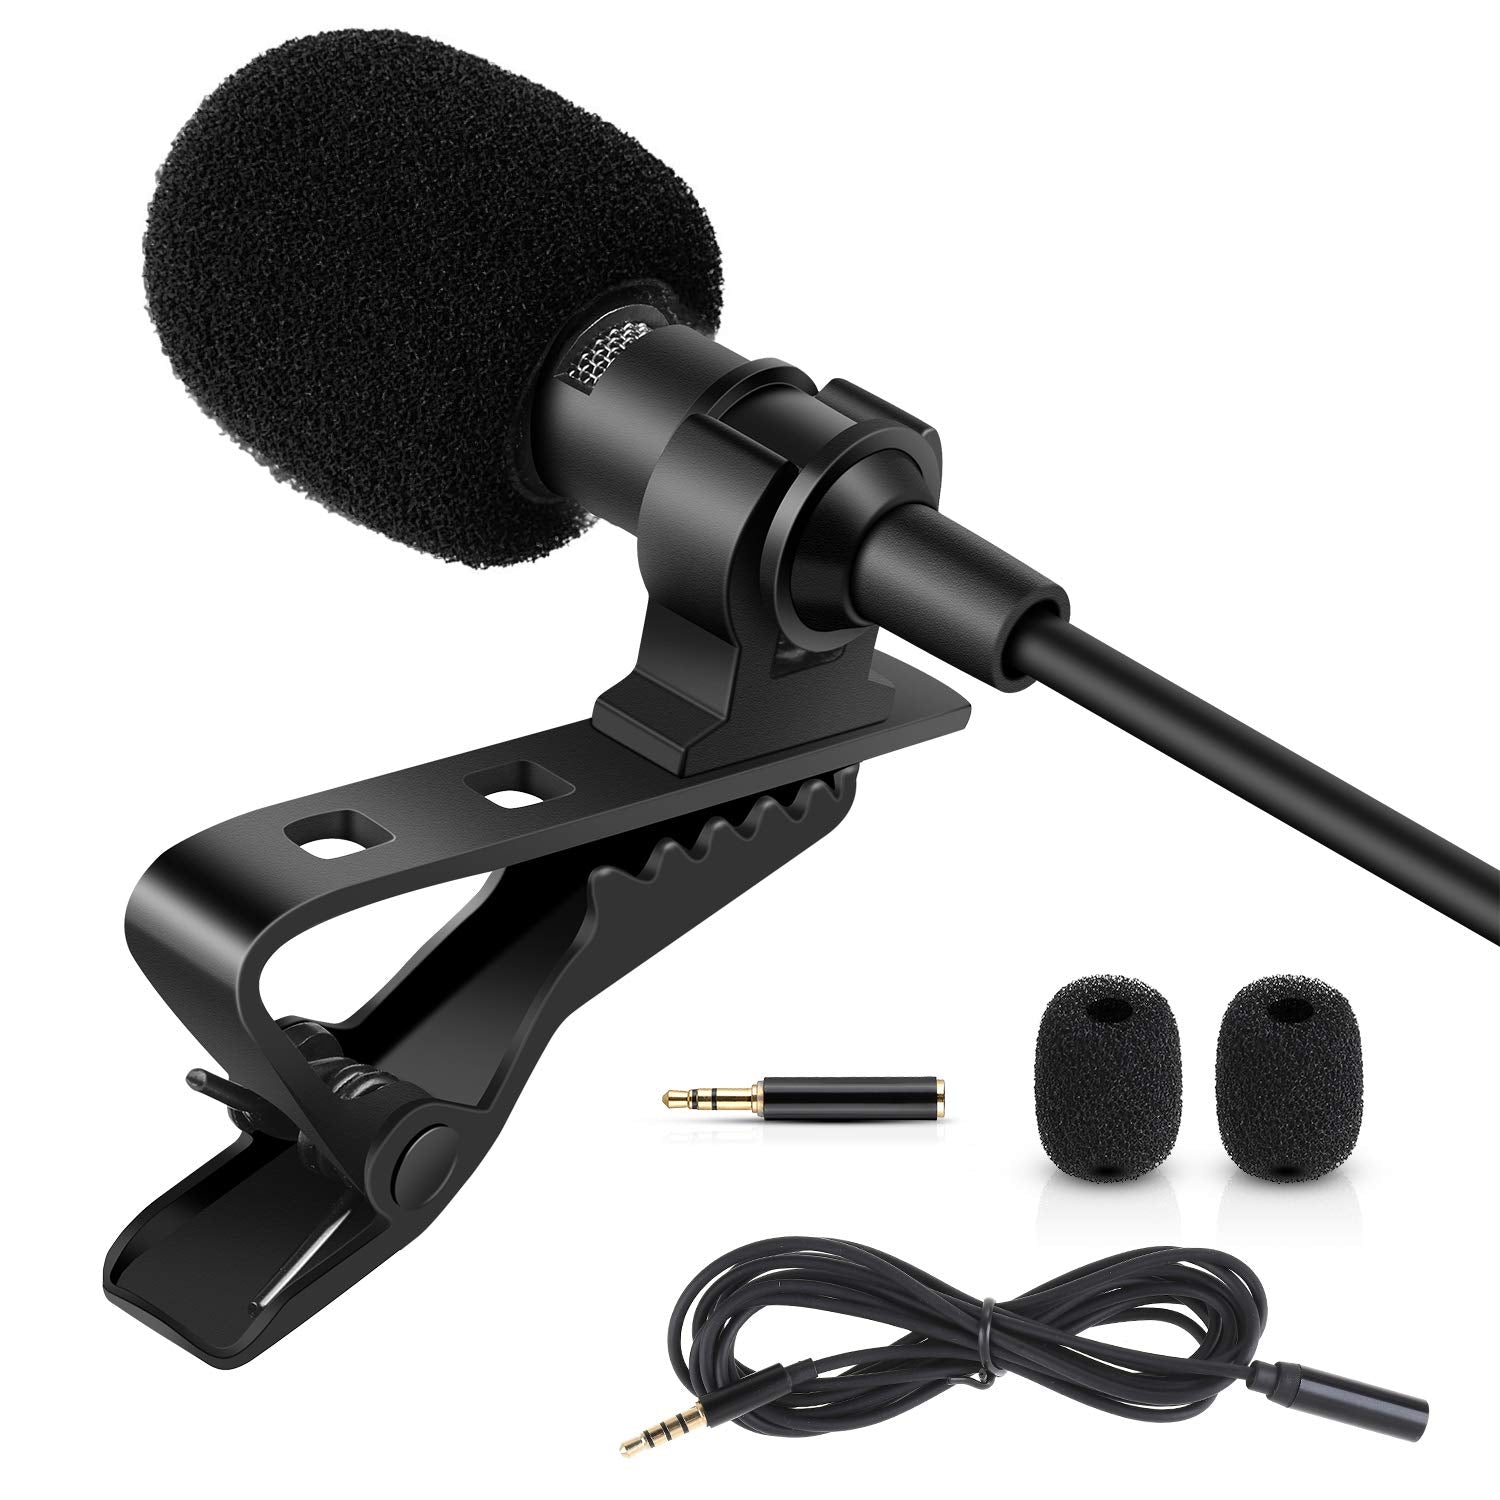 PROFESSIONAL LAVALIER MIC,Microphone,Professional Mic, Professional Microphone